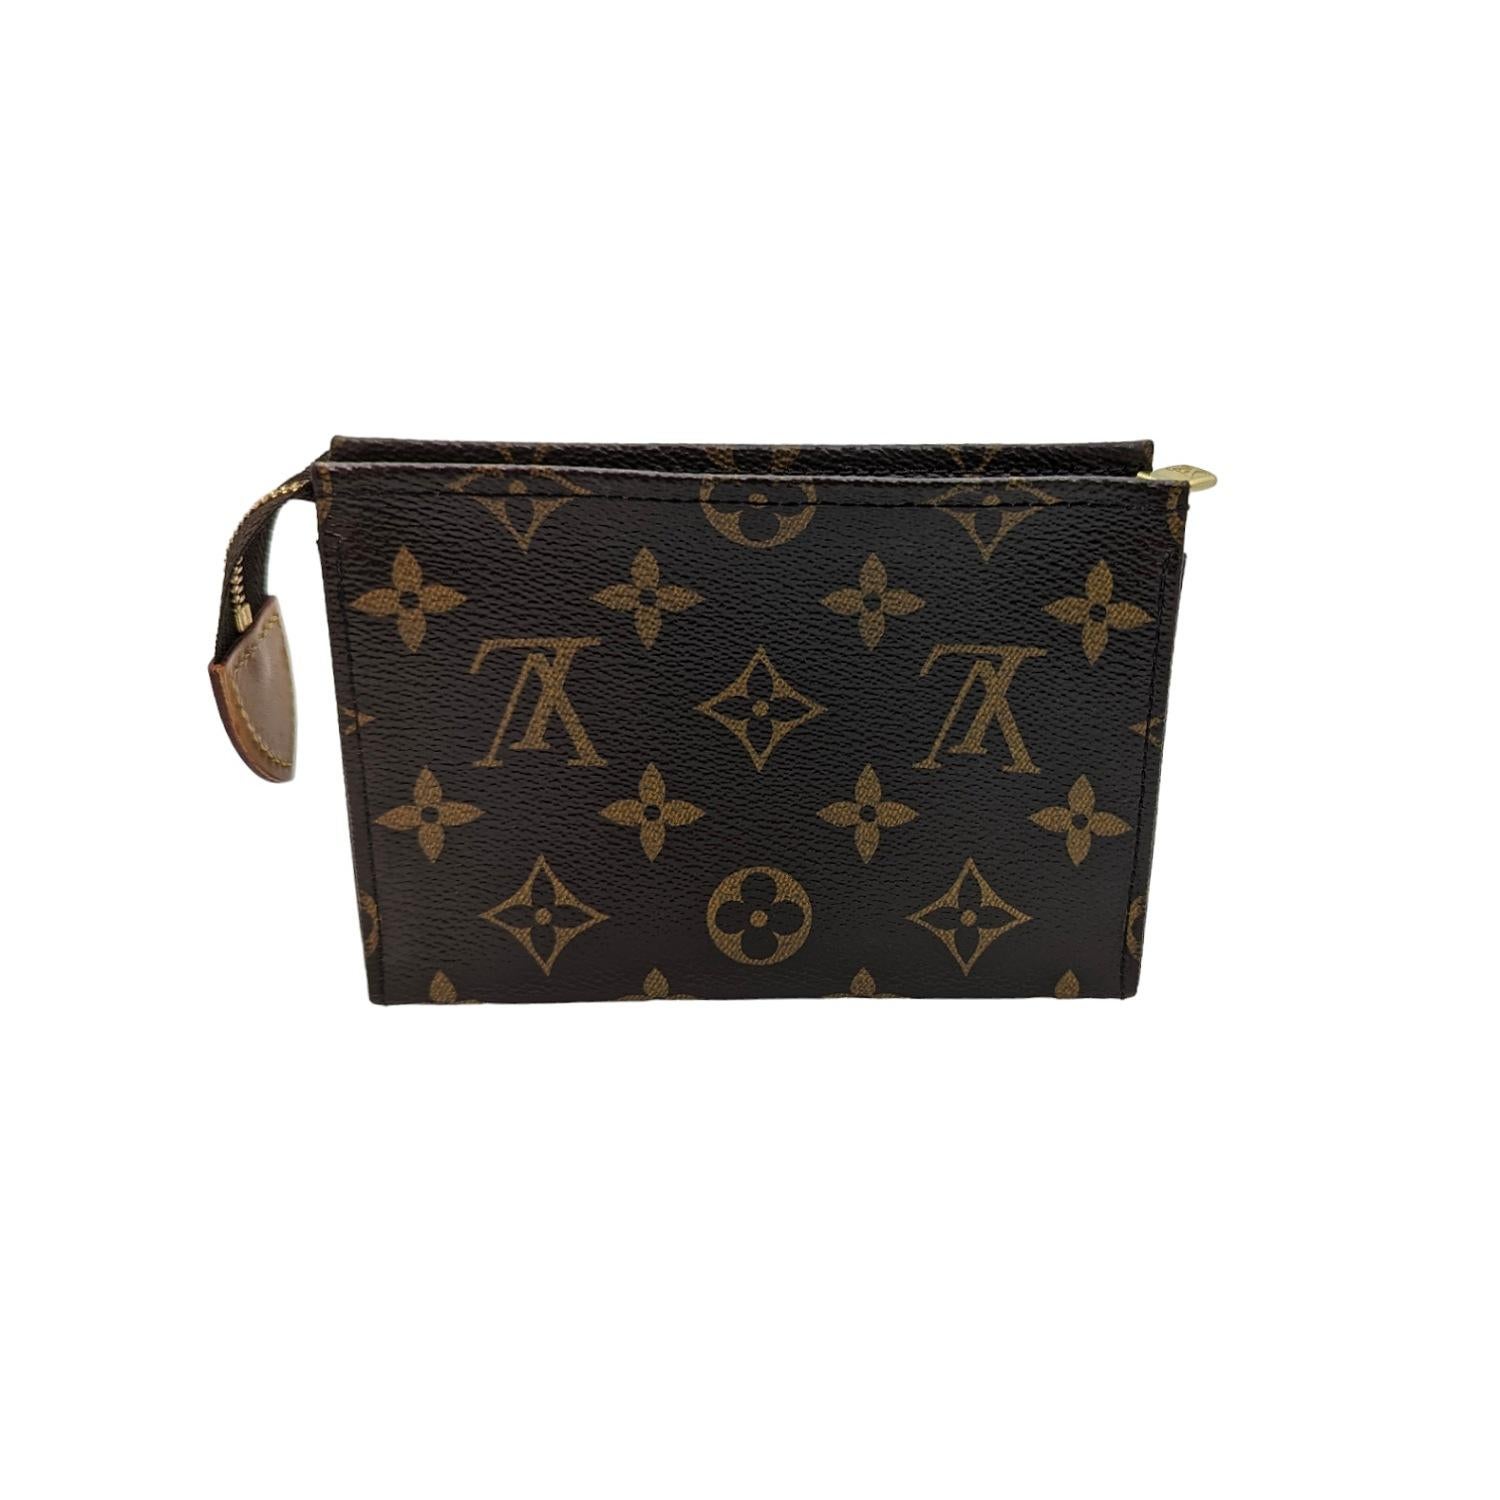 Louis Vuitton Monogram Toiletry Pouch 15. This cosmetics pouch is crafted of classic Louis Vuitton monogram coated canvas. The pouch features a polished brass top zipper that opens to an ivory interior.

Designer: Louis Vuitton
Material: Monogram